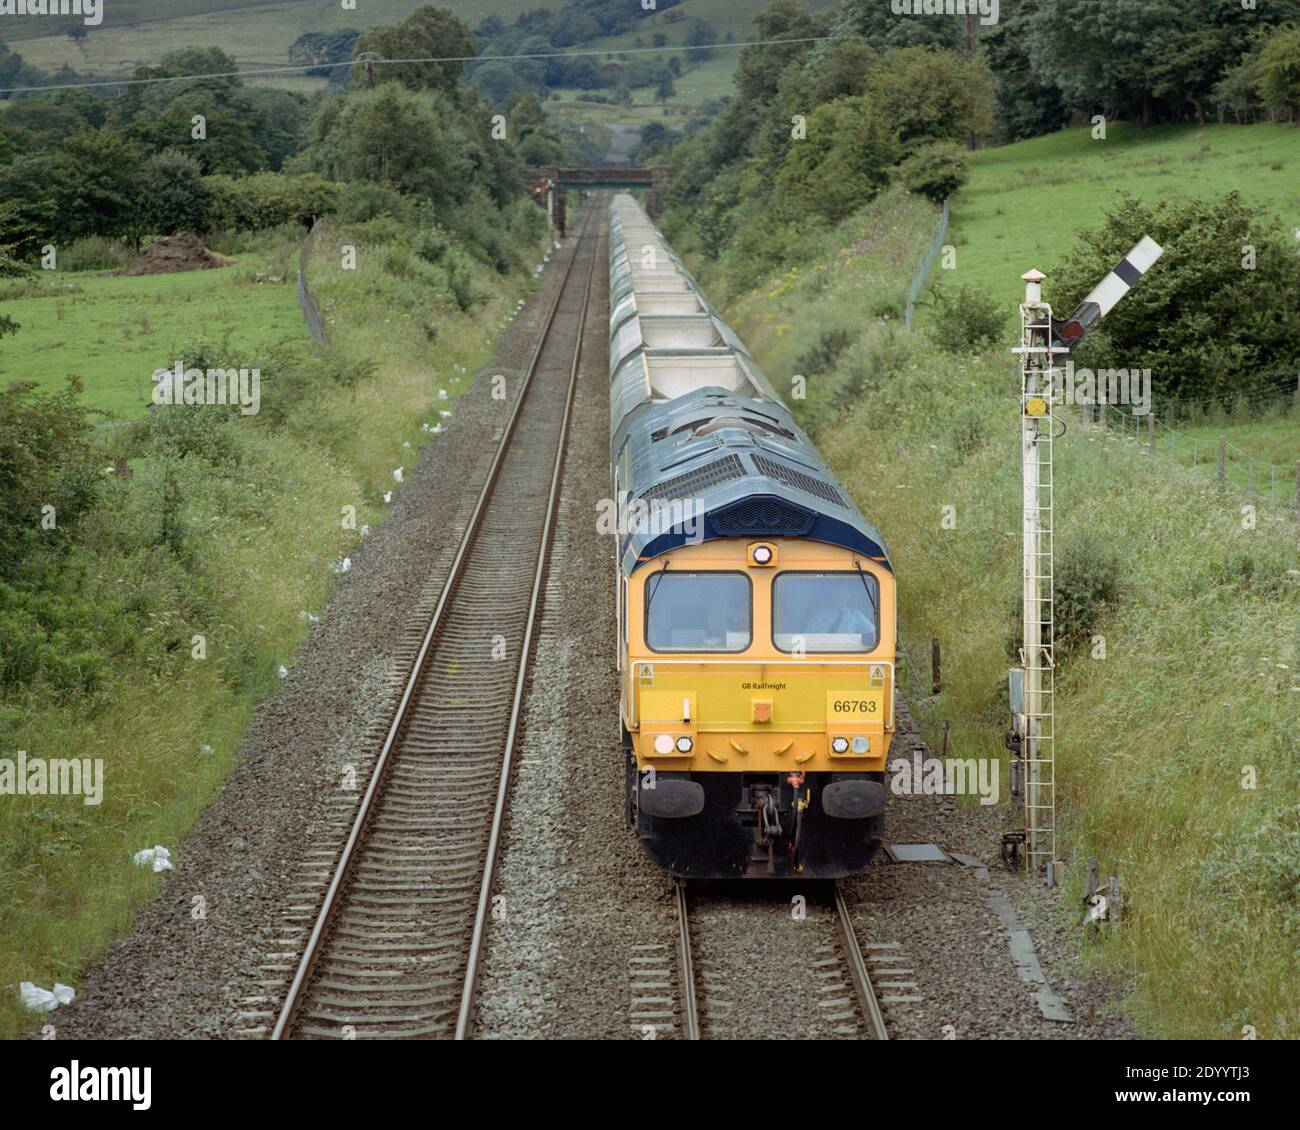 Edale, Hope Valley, UK - 18 July 2020: A freight train operated by GB Railfreight at Edale. Stock Photo